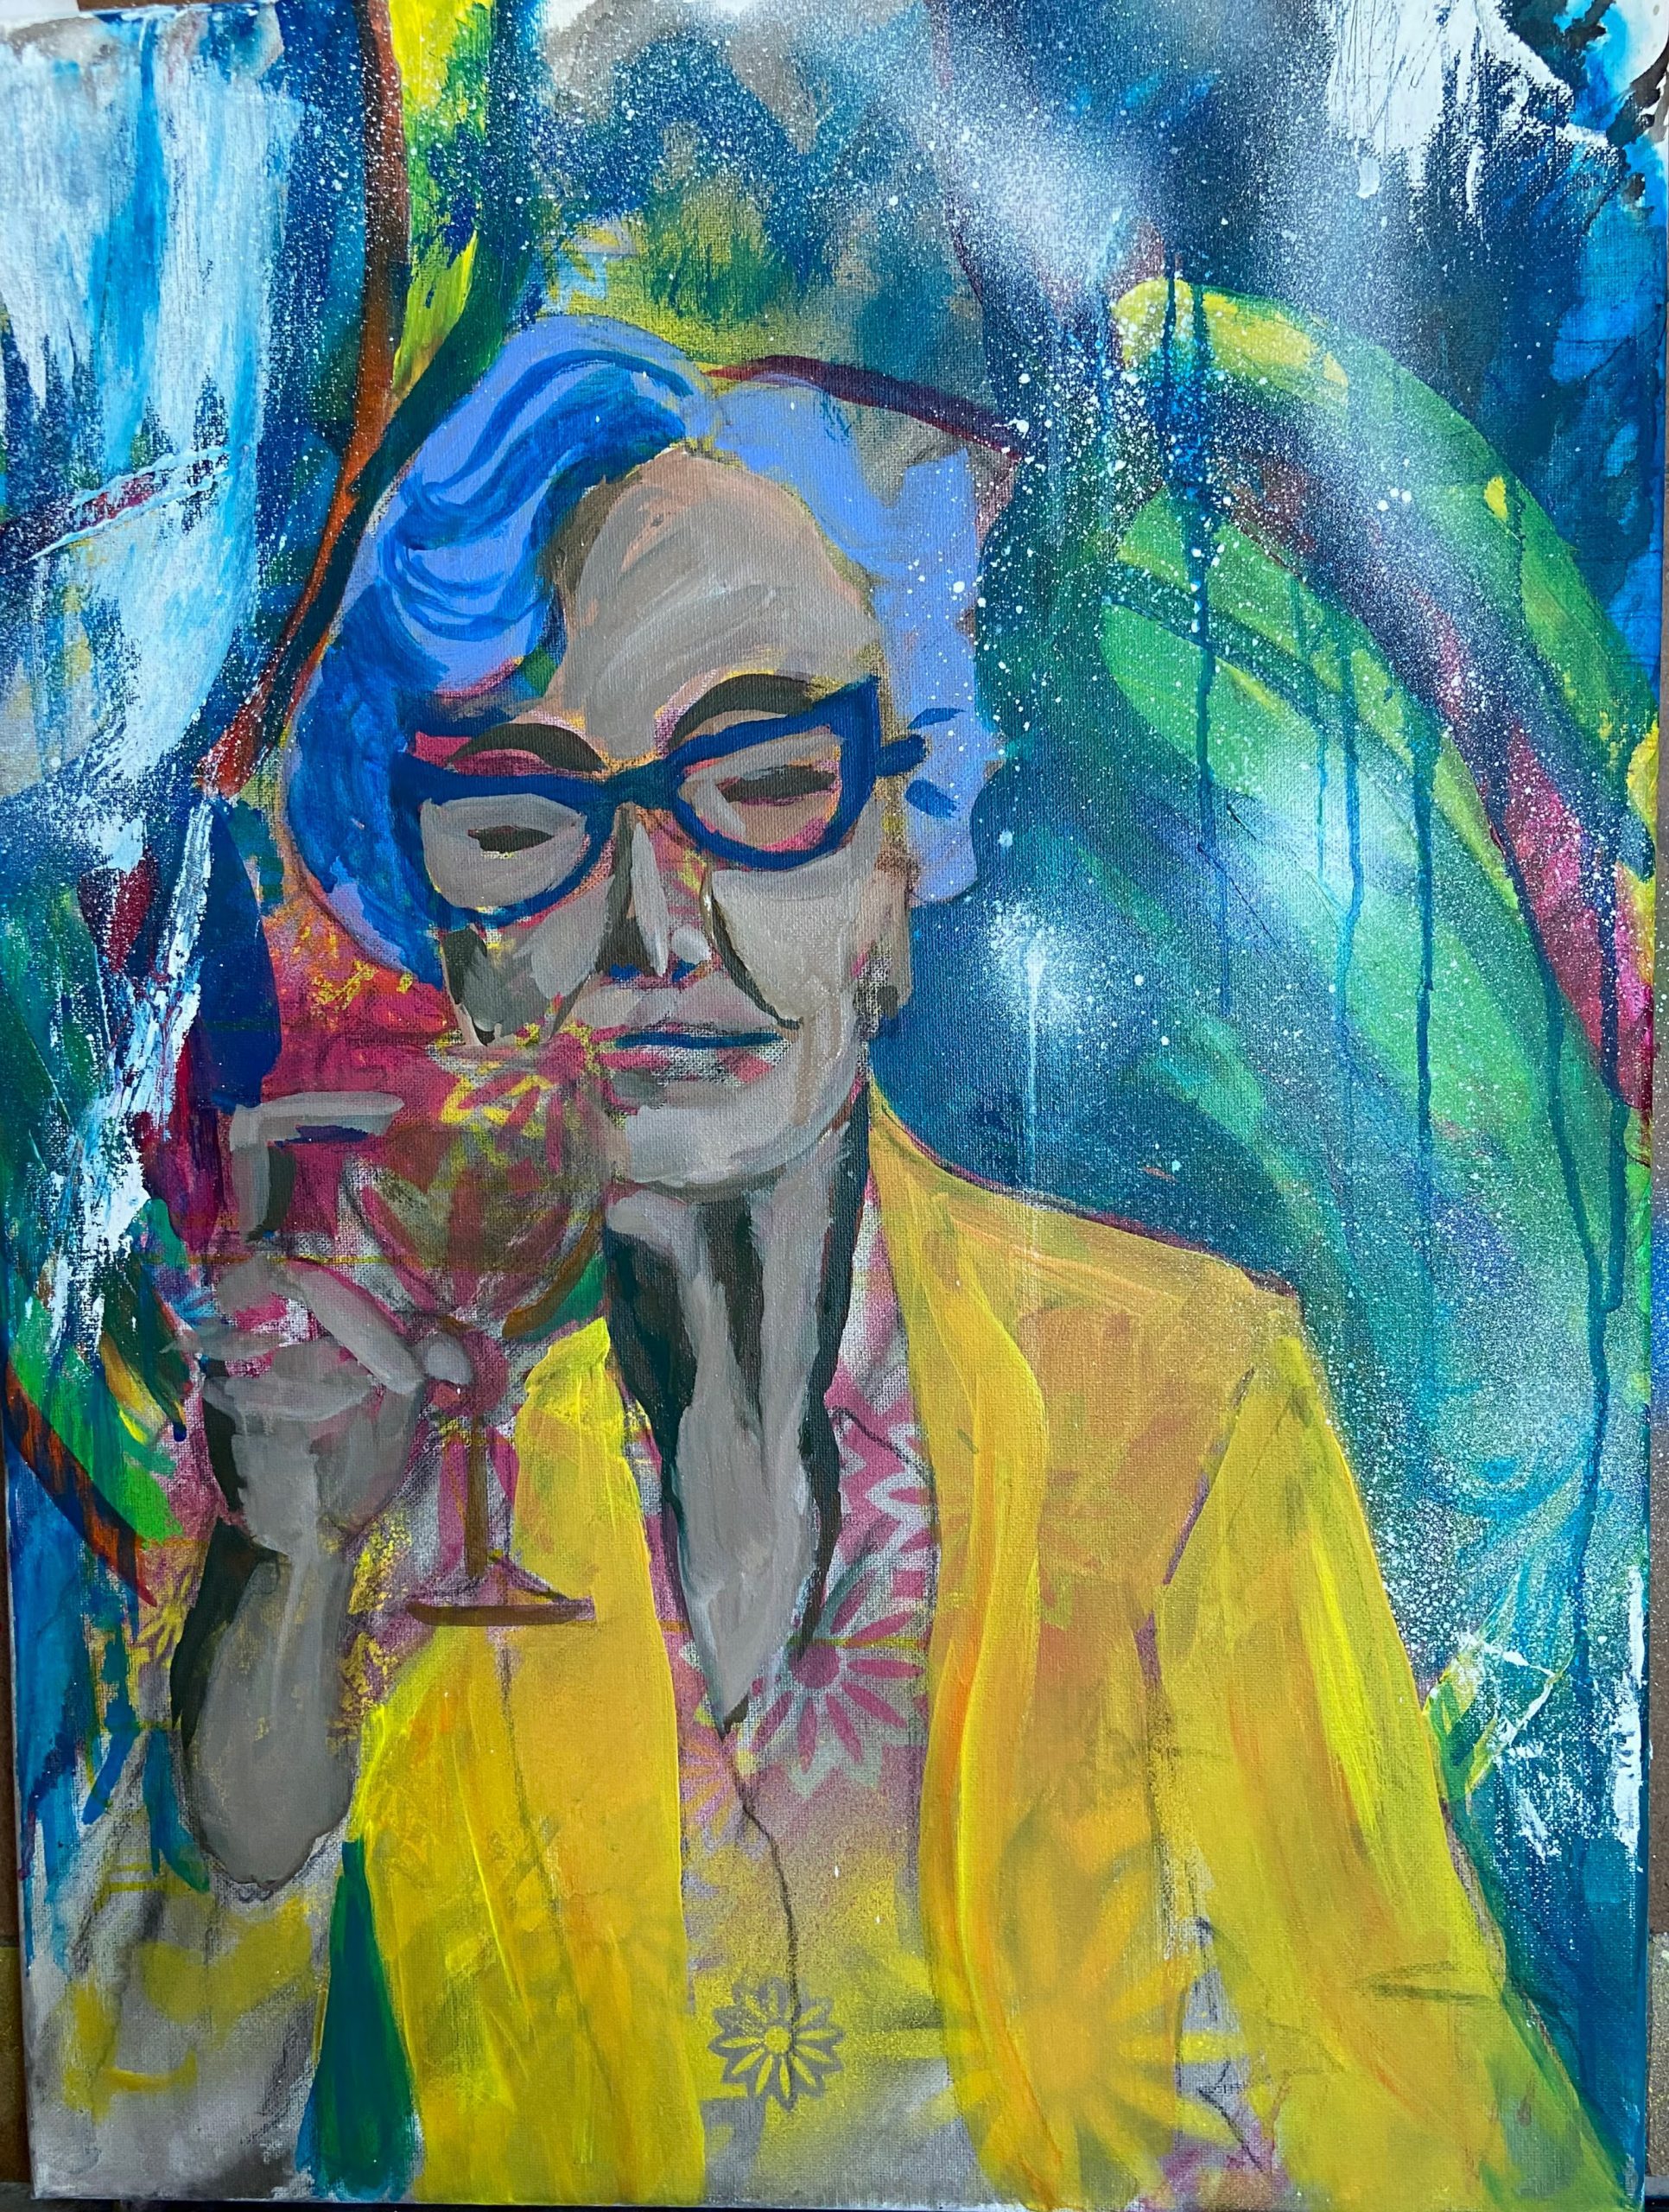 Underpainting showing a woman lifting a glass of wine.